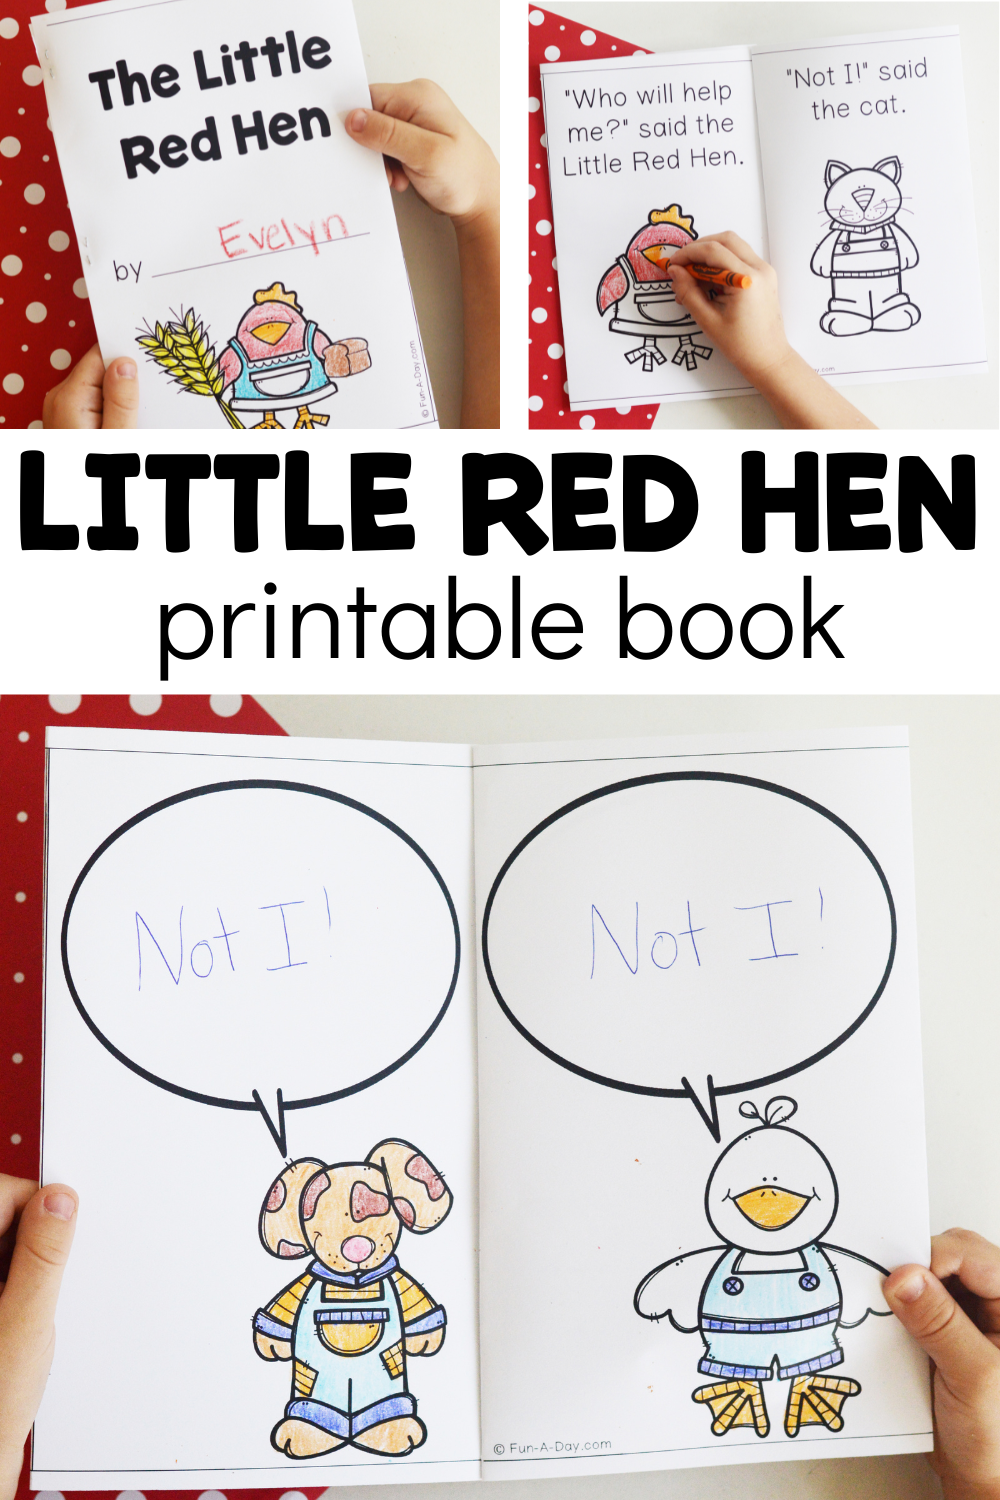 Multiple views of emergent reader with text that reads little red hen printable book